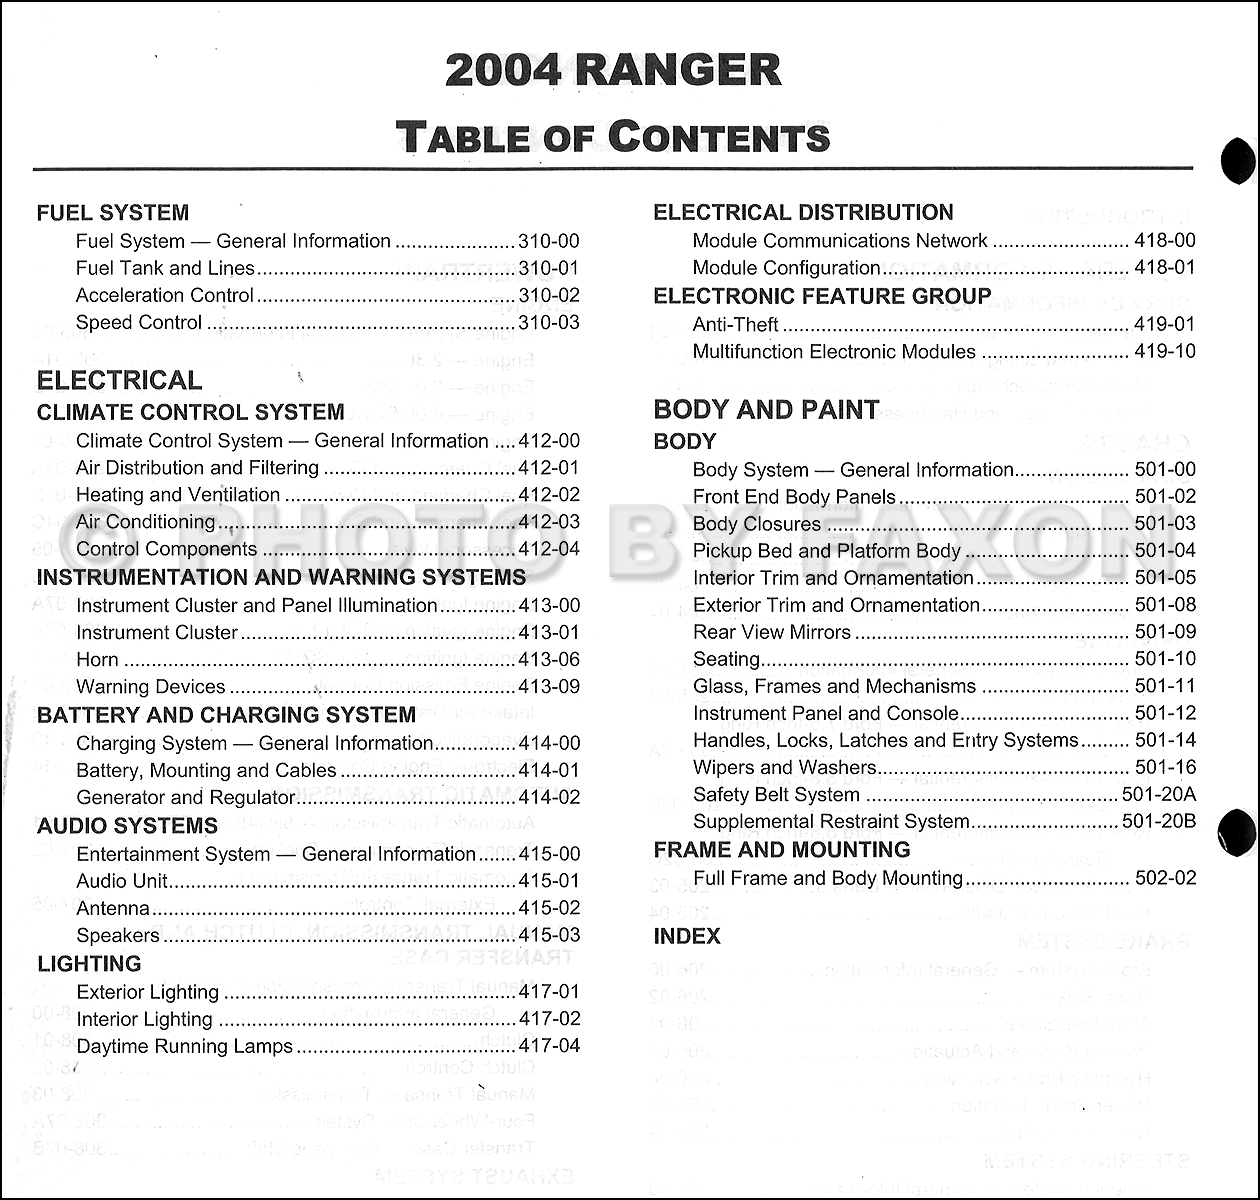 2004 Ford ranger edge owners manual pdf #1